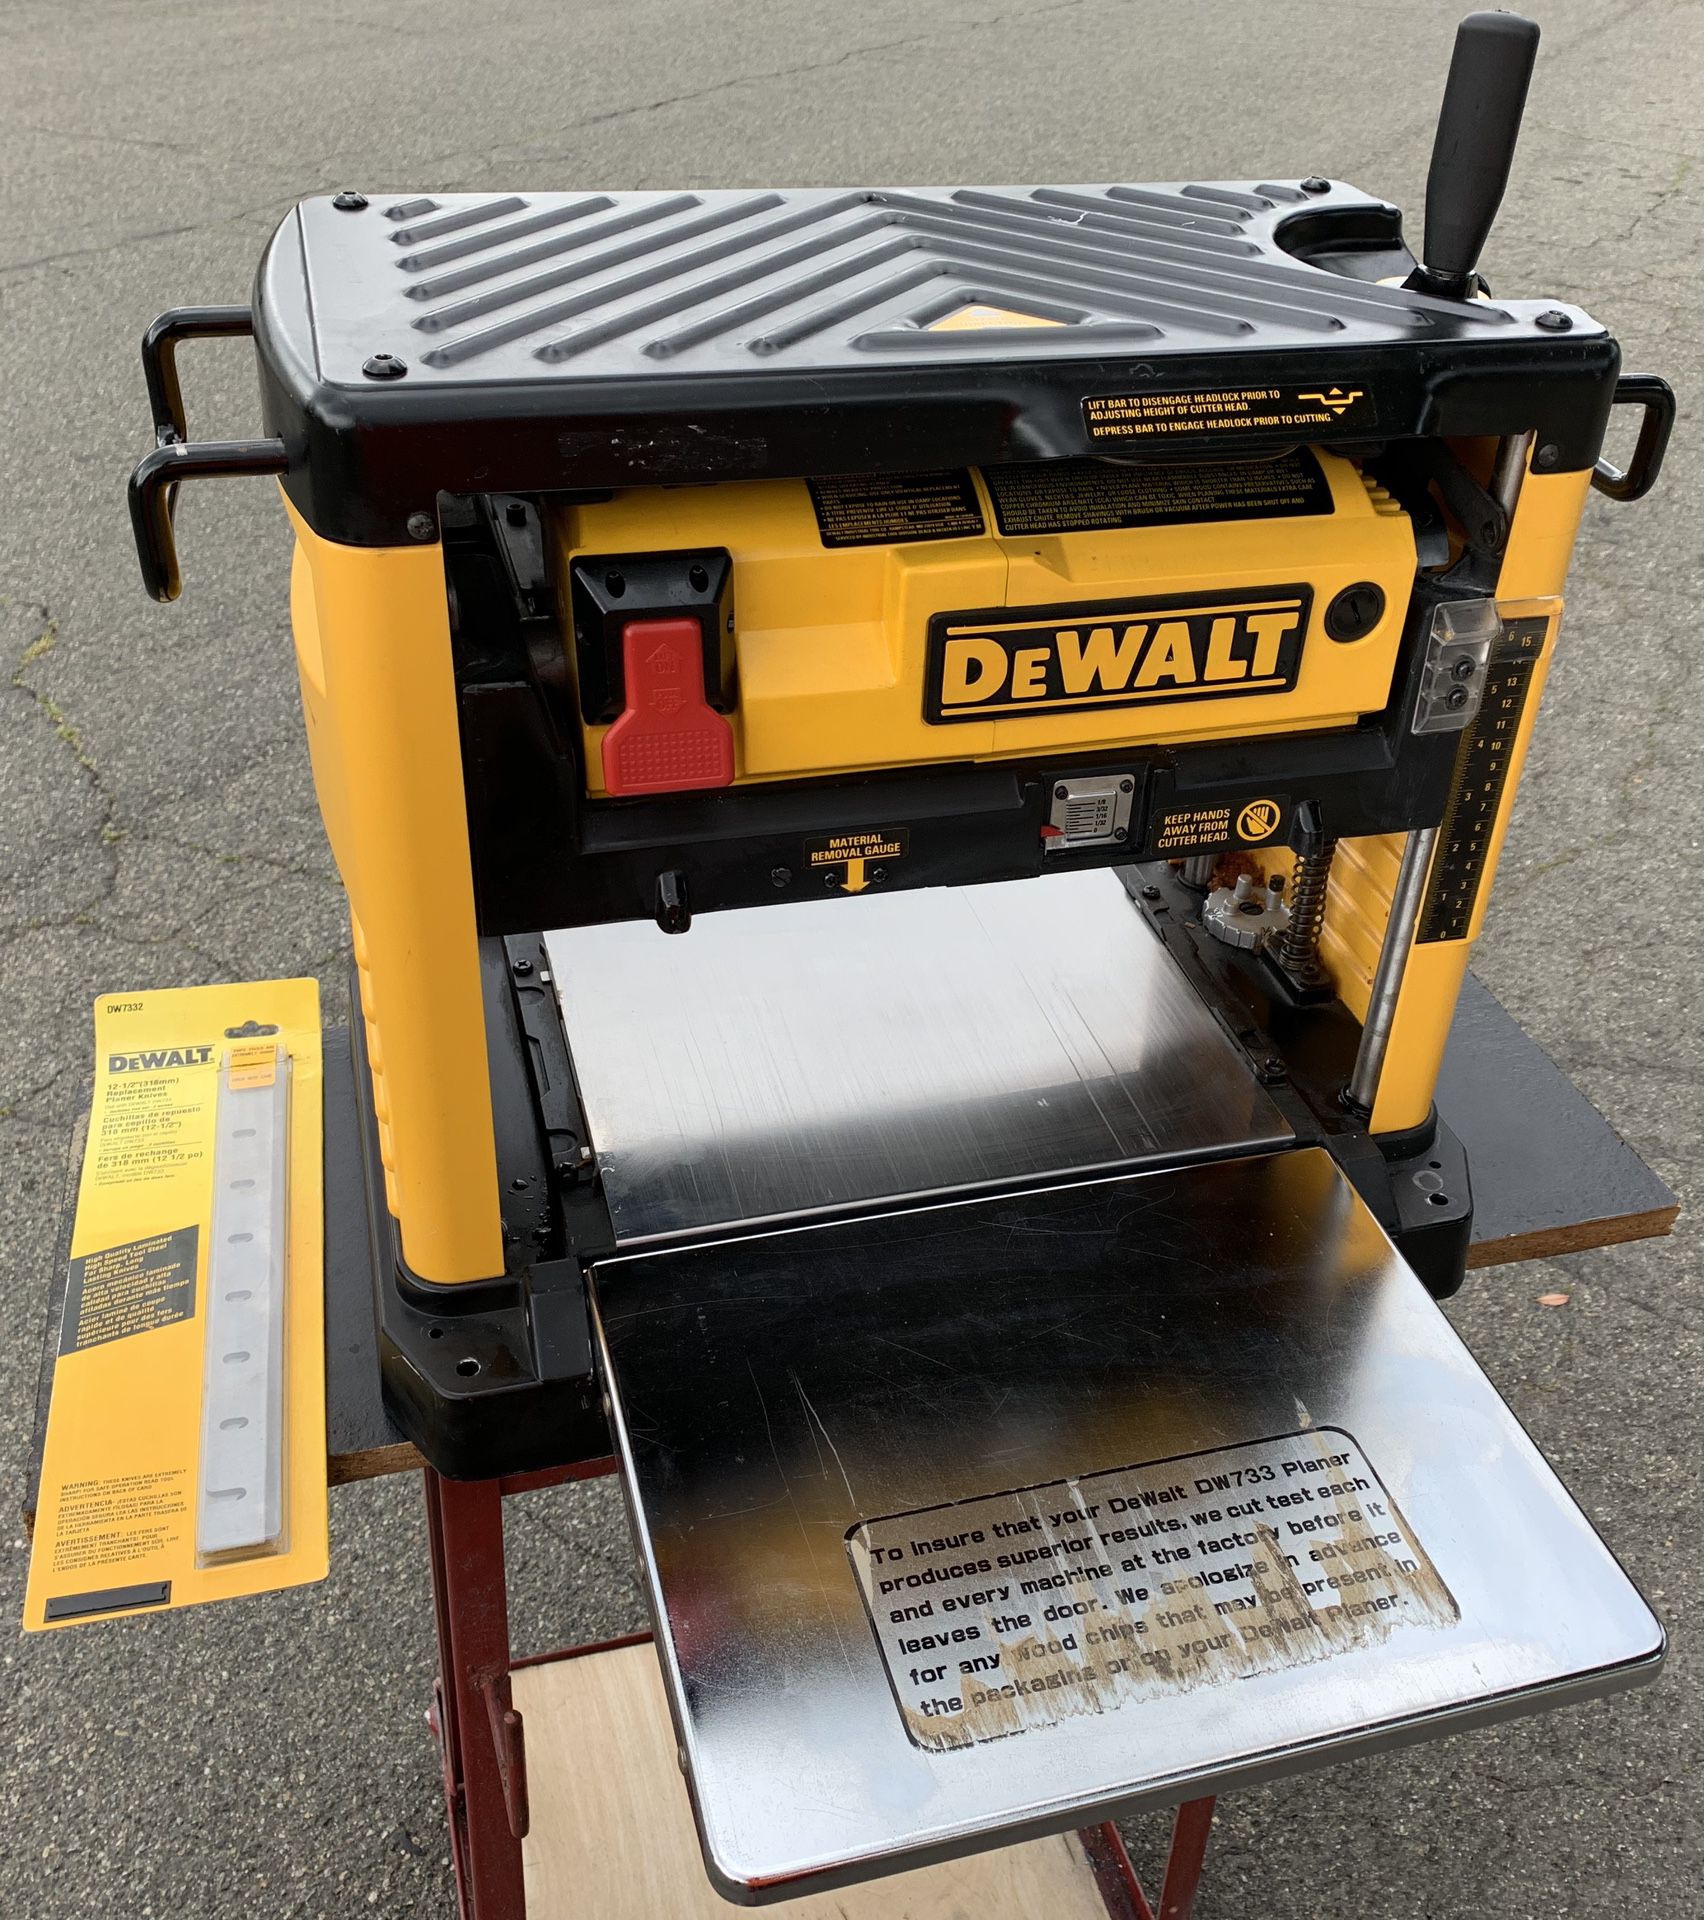 DeWalt DW733 12-1/2” Portable Thickness Planer and Stand (Works Good) Sale in Yuba City, CA - OfferUp